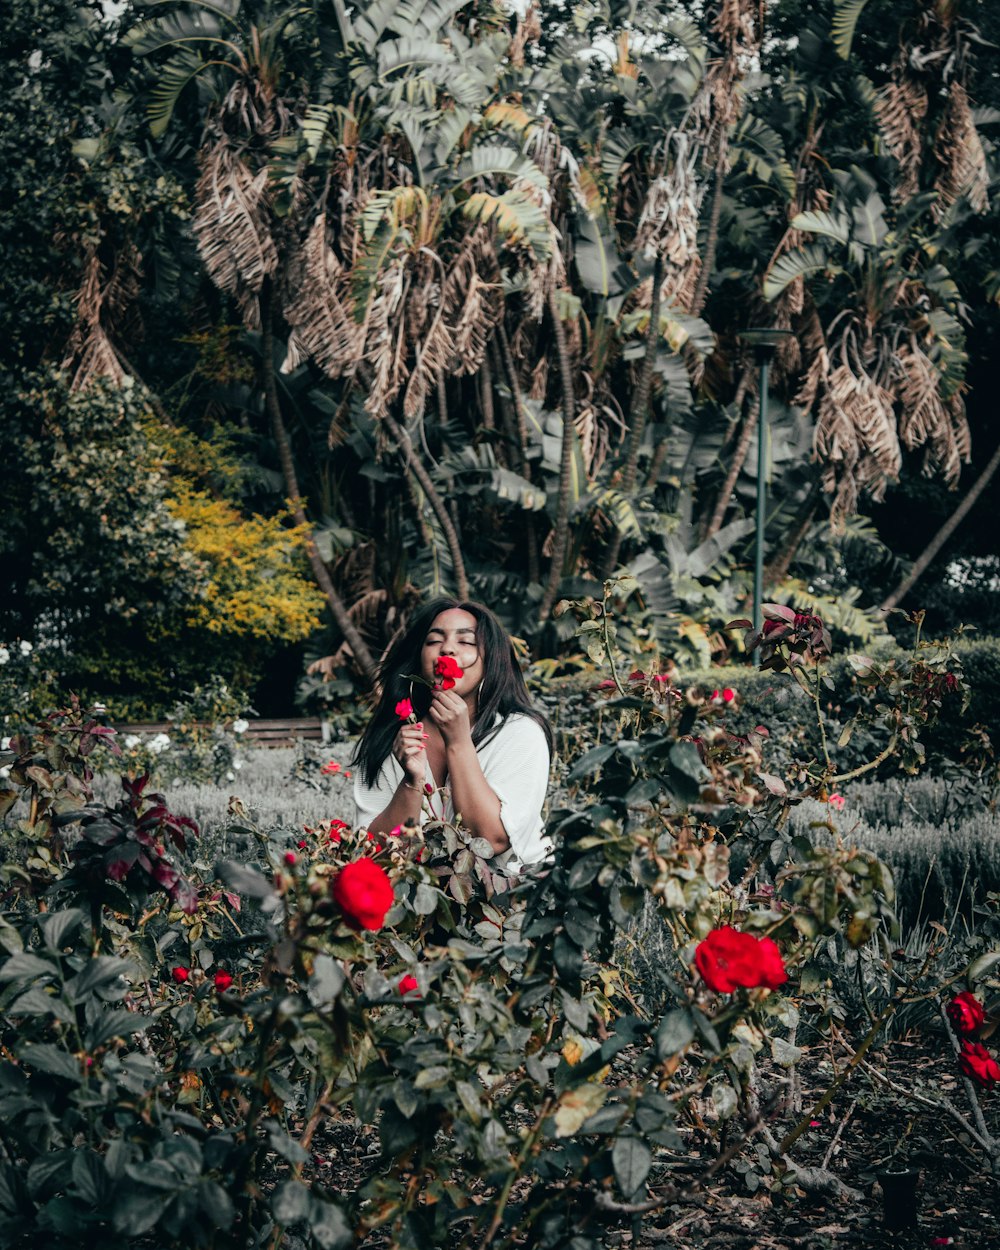 woman in white shirt and red pants standing on red flowers surrounded by trees during daytime